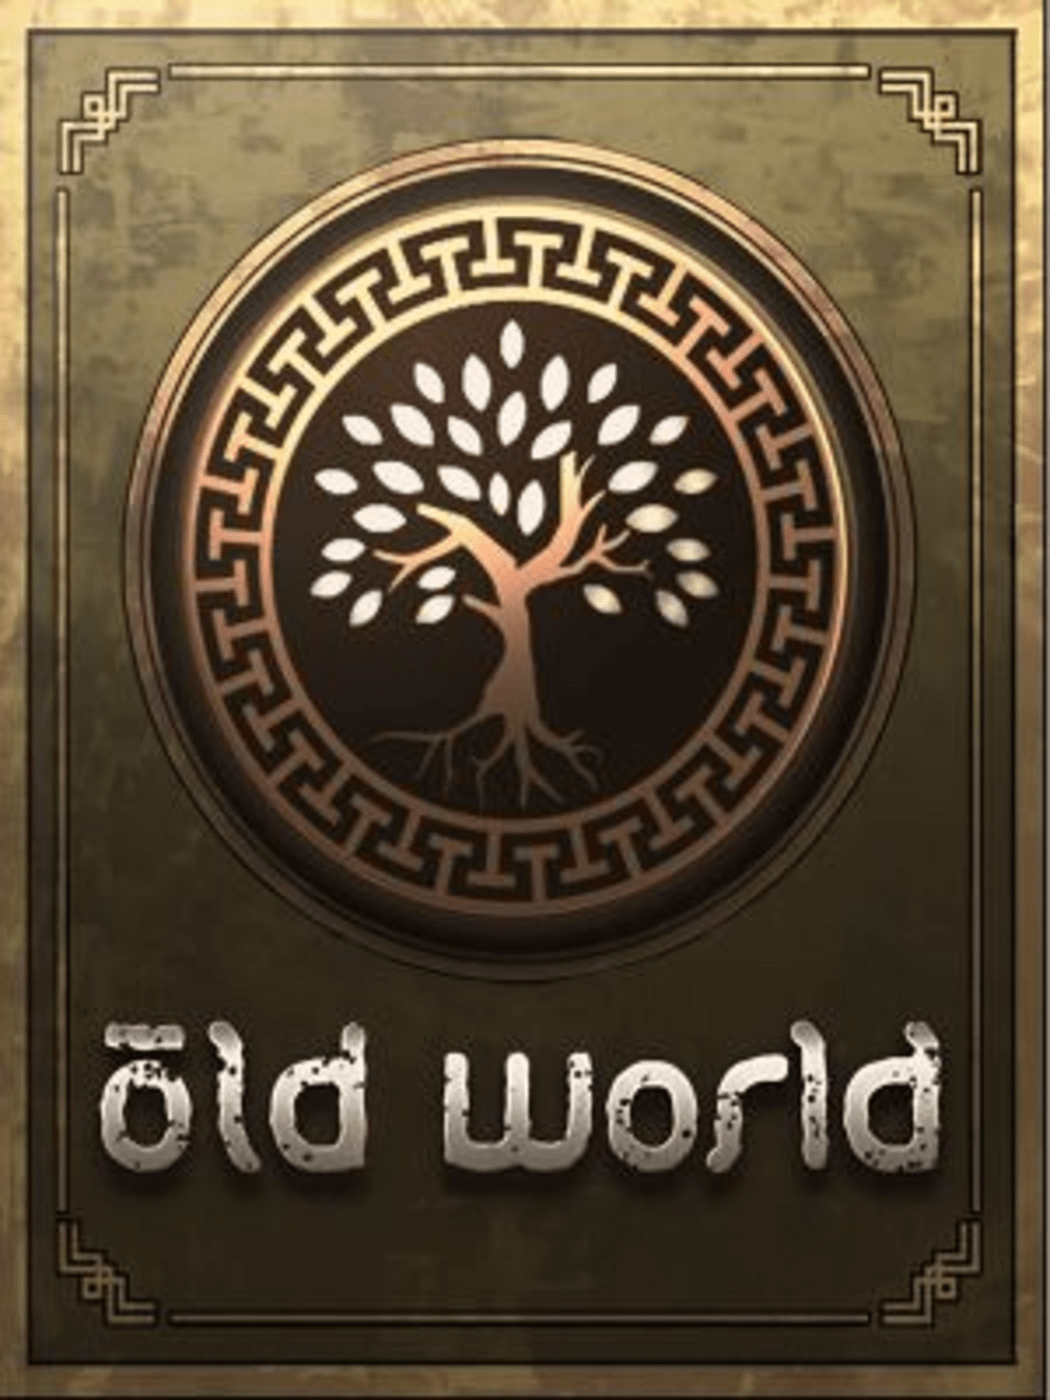 Old World - Heroes of the Aegean - PC [Steam Online Game Code